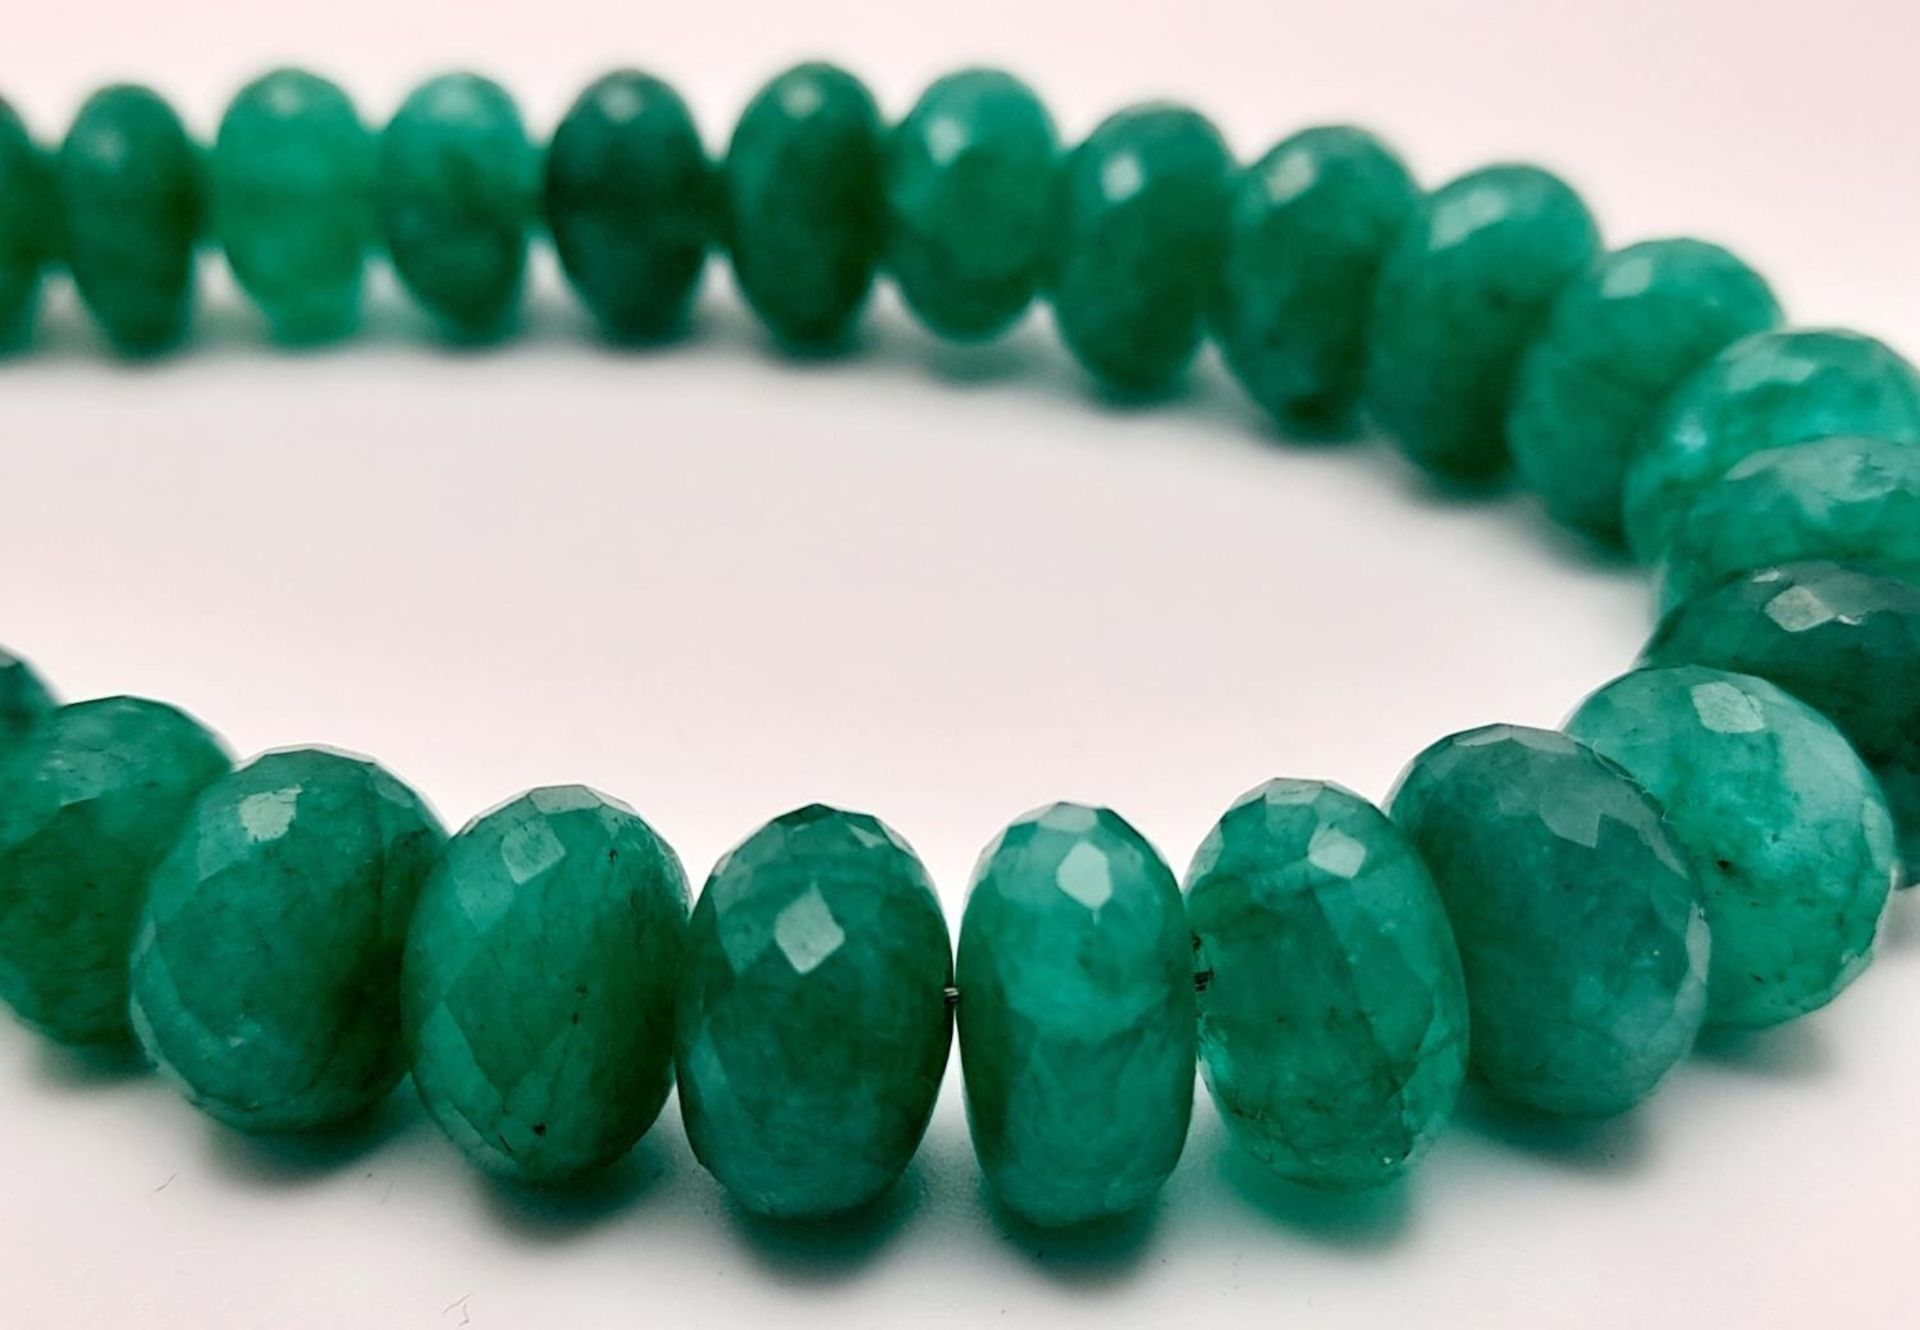 A 130ctw Faceted Rondelle Emerald Bracelet with a sapphire and 925 Silver clasp. 16cm. Ref: CD-1298 - Image 2 of 4